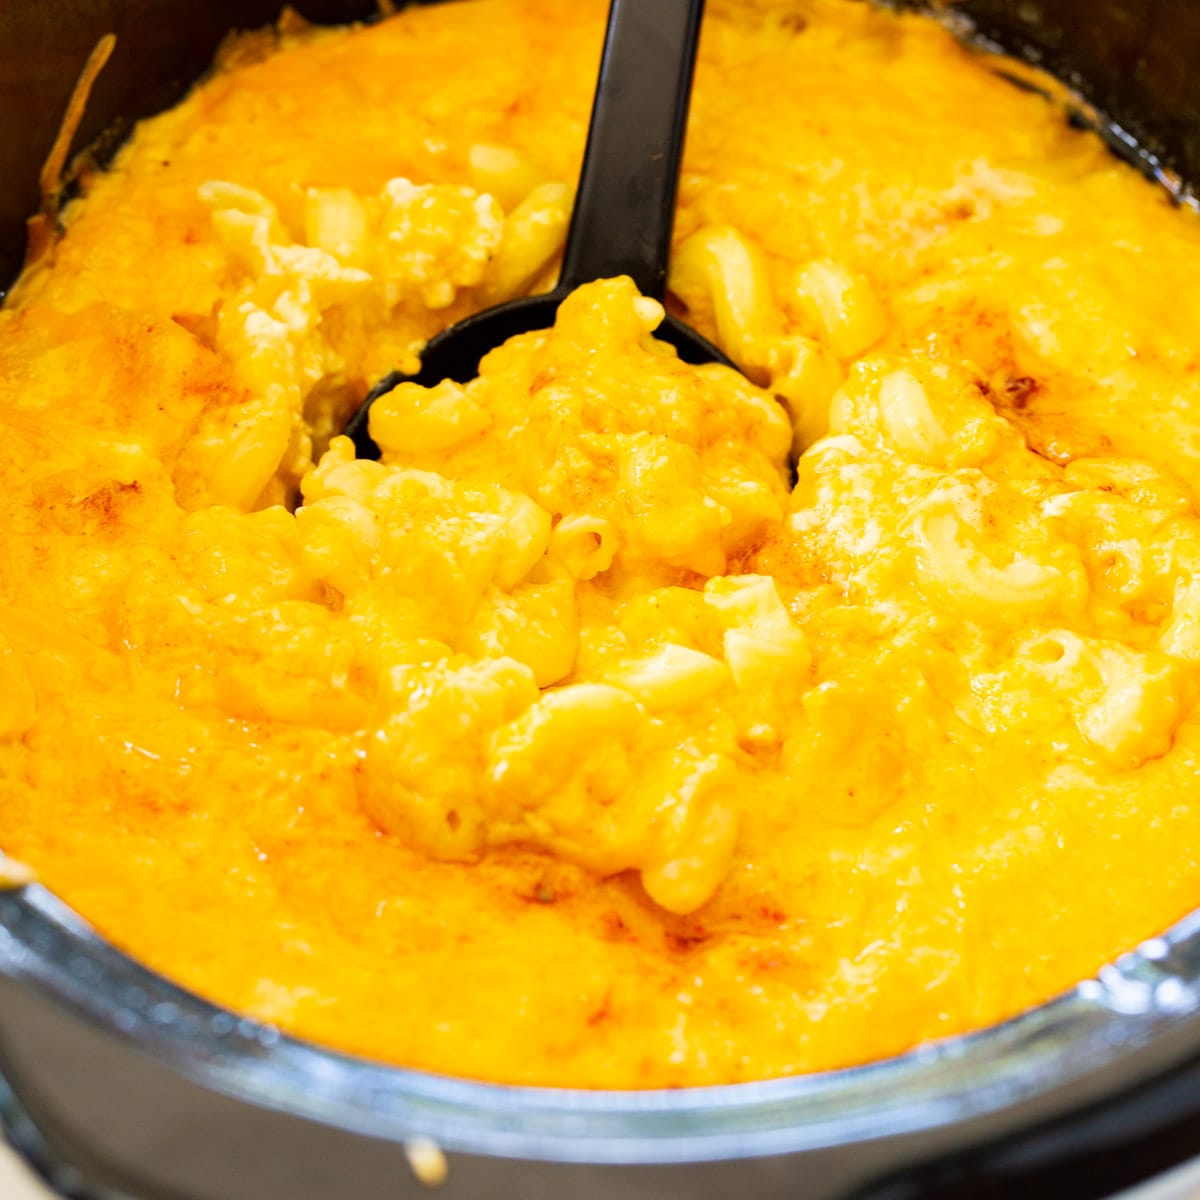 Spoon scooping Trisha Yearwood's Slow Cooker Mac and Cheese in a slow cooker.